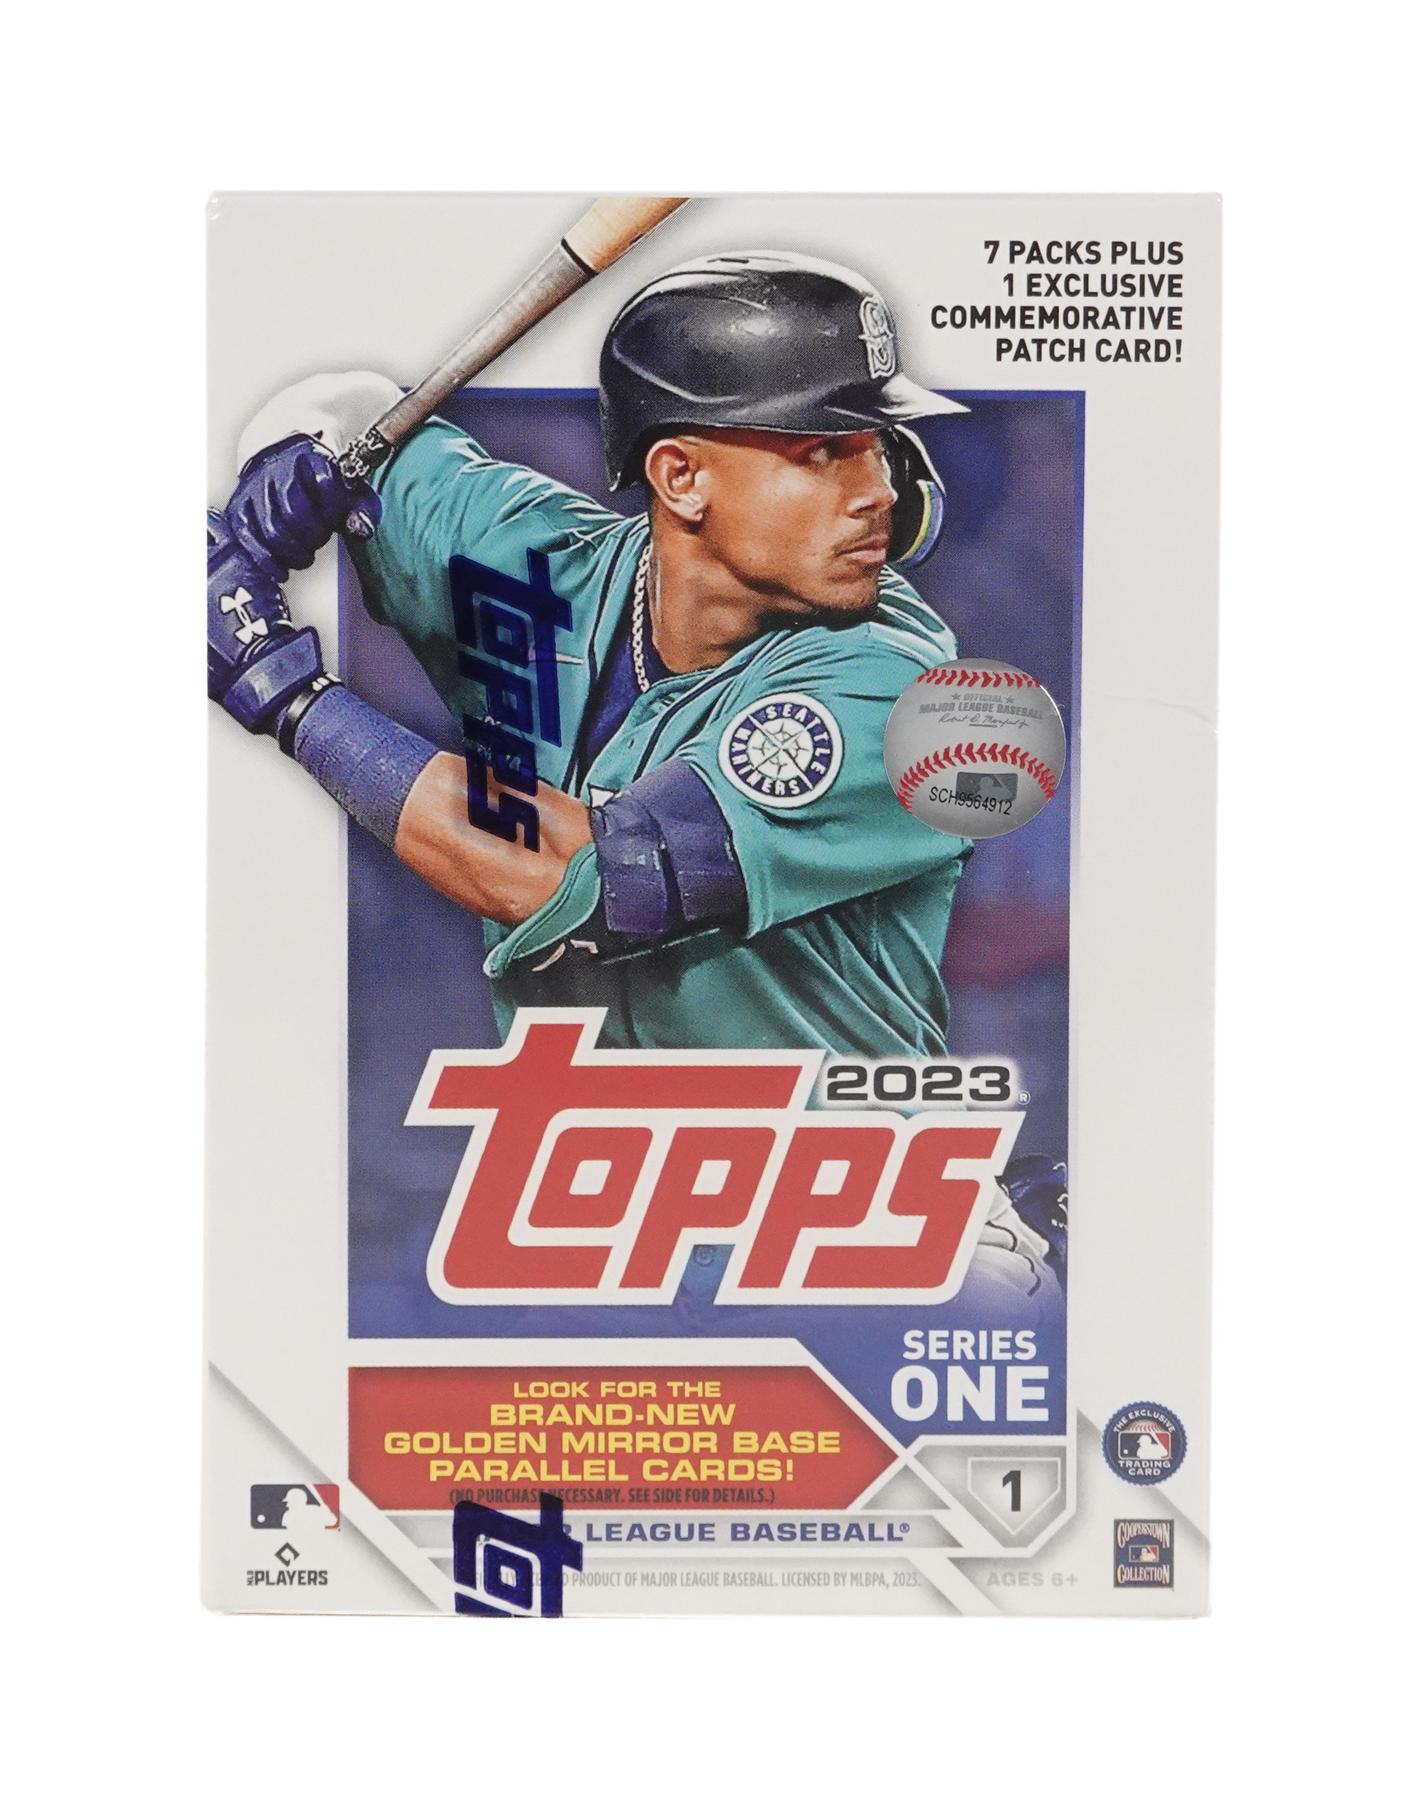 Dodgers baseball cards: A review of 2023 Topps Series 1 - True Blue LA